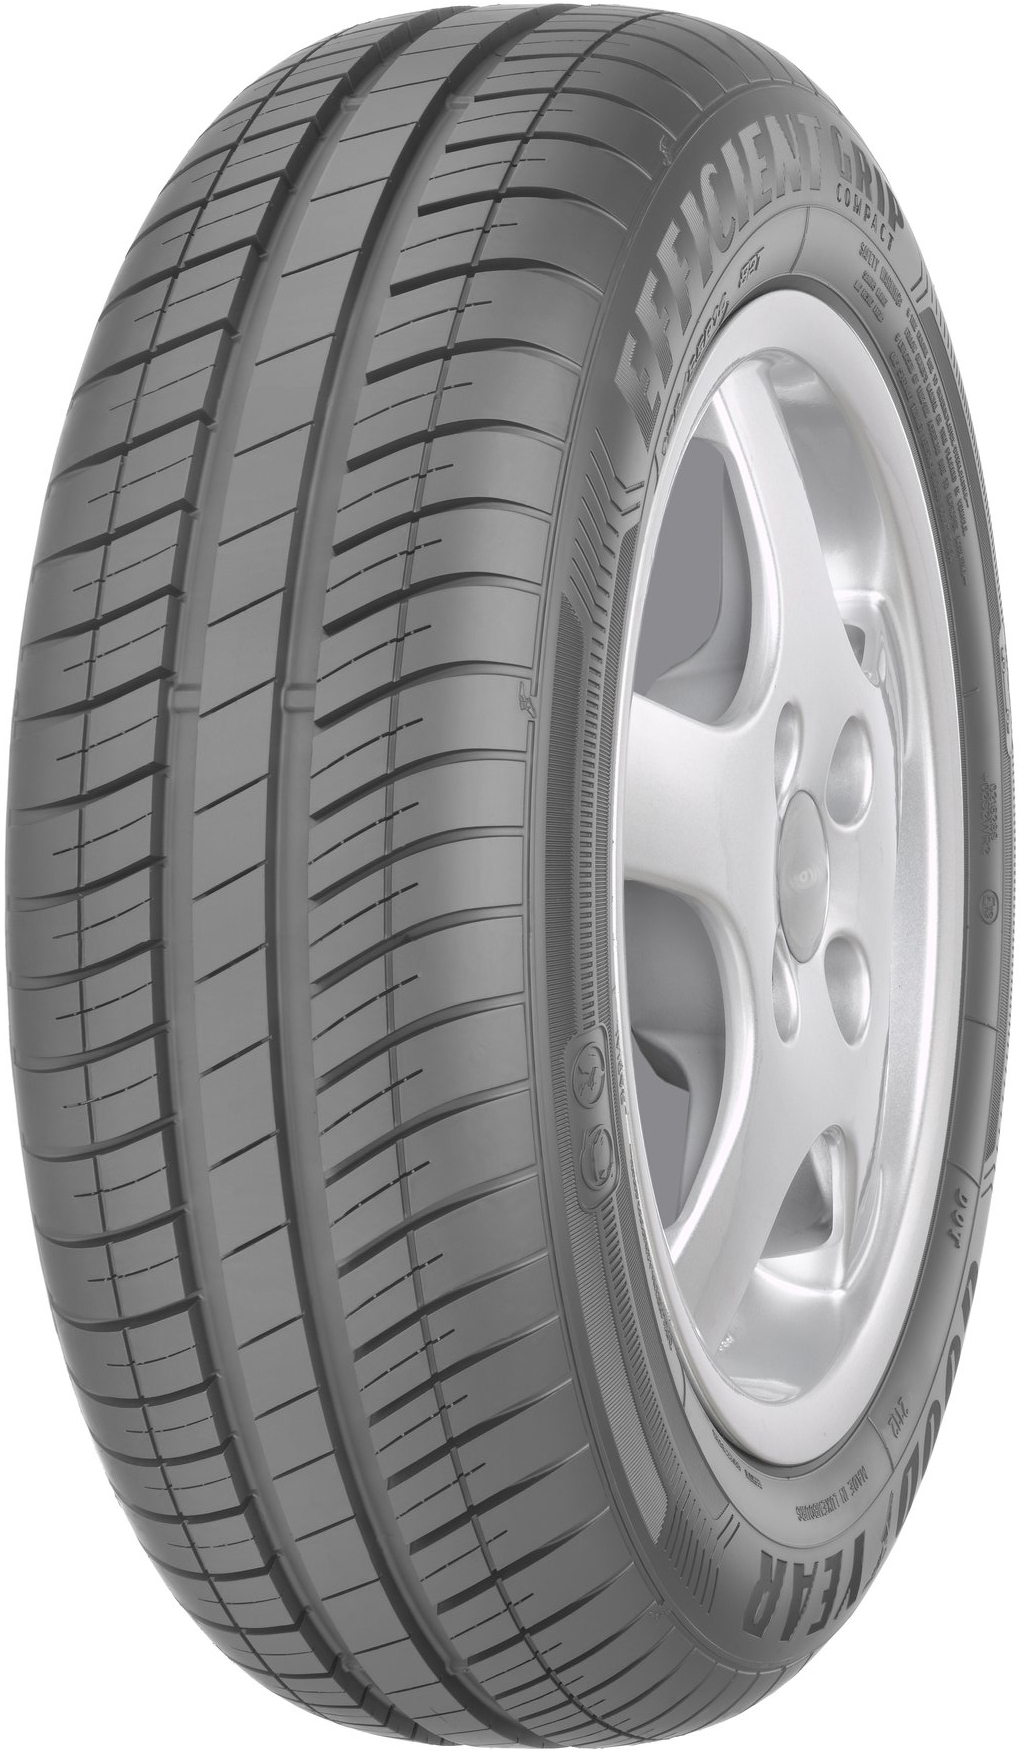 Anvelope auto GOODYEAR EFFICIENGRIP COMPACT 185/65 R15 88